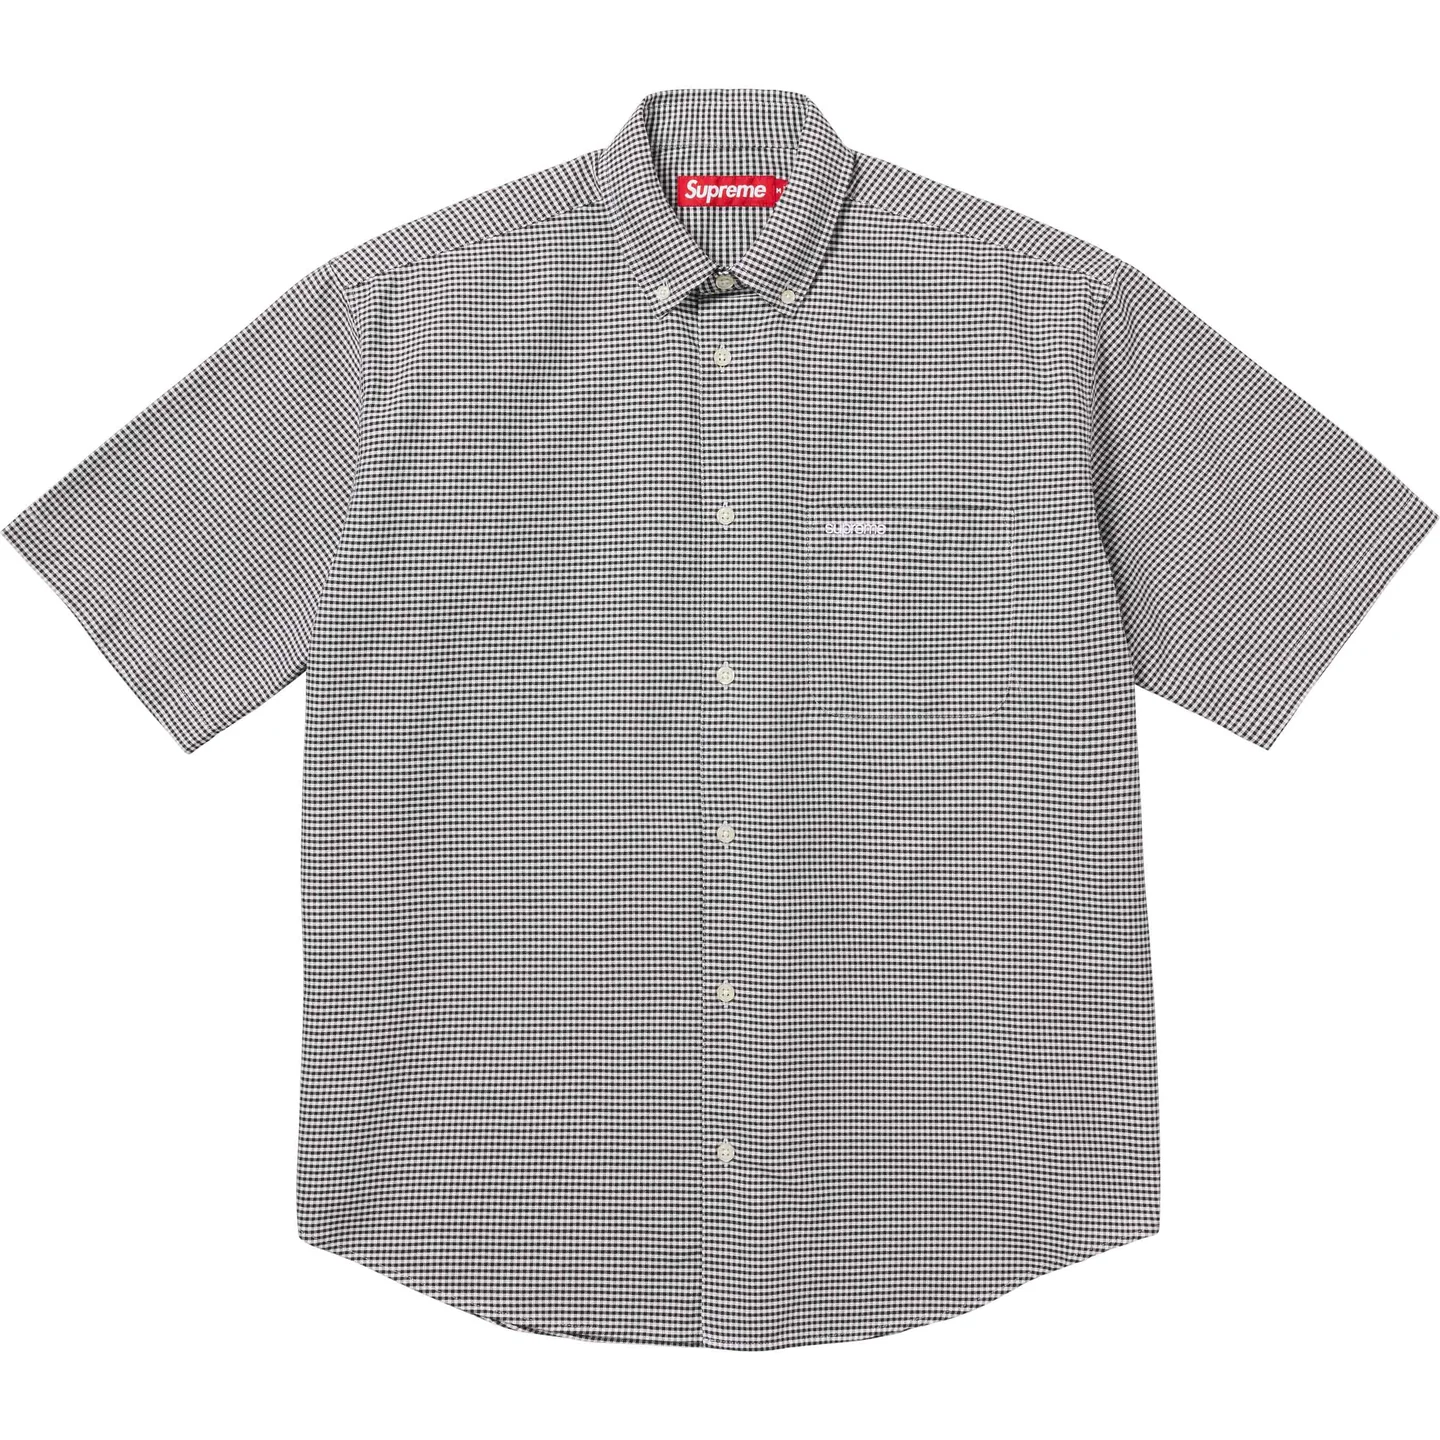 Supreme Loose Fit S/S Oxford Shirt